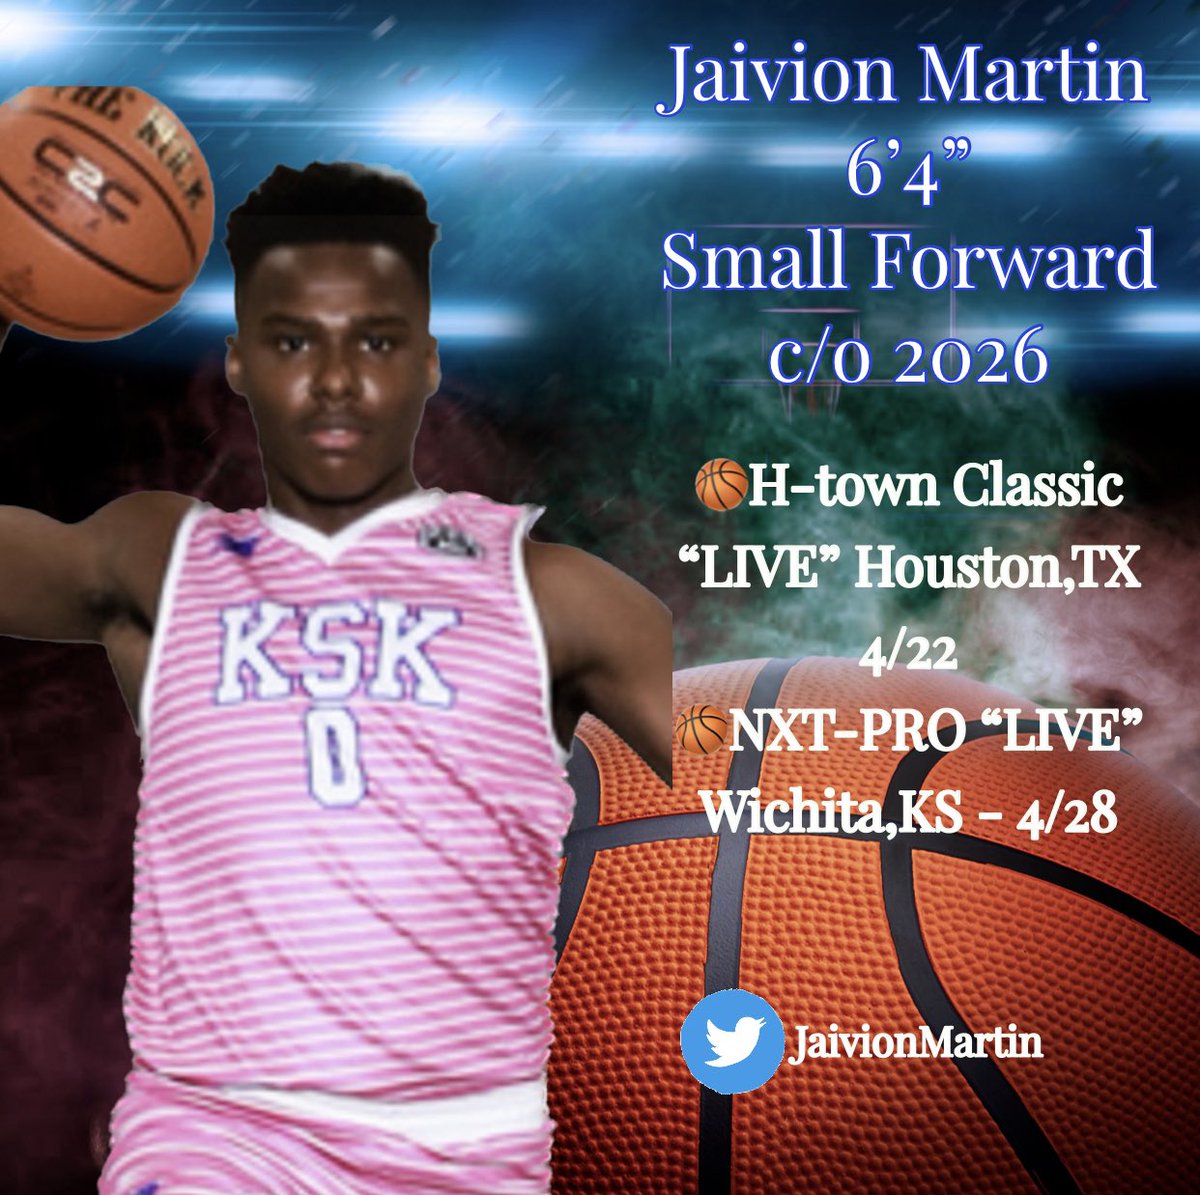 Come check out @JaivionMartin @BigfootHoops “LIVE” period #htownclassic this weekend.

#collegerecruit #basketball #ncaabasketball #ncaaliveperiod #collegeprospect #NBA #Houston #newbalancehoops #wegotnow